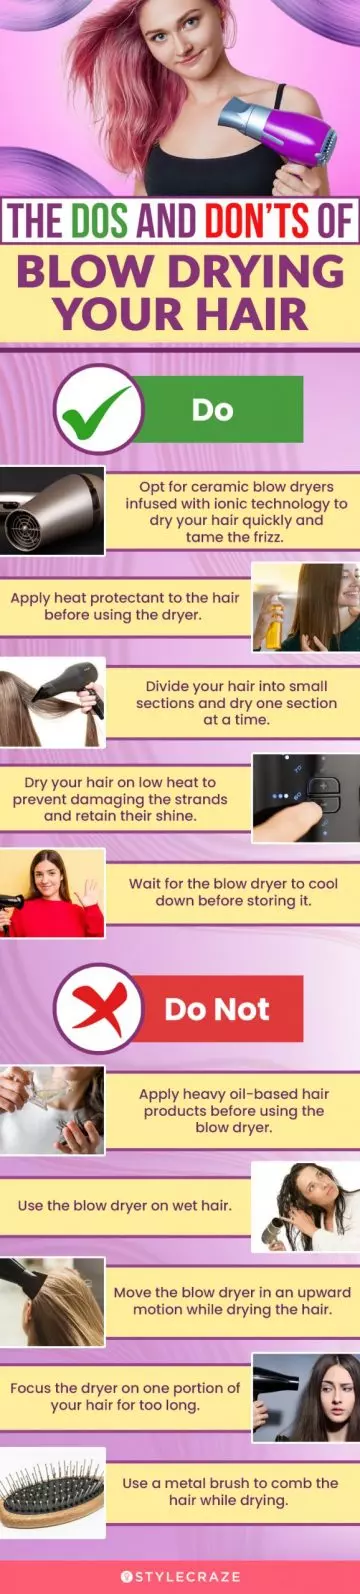 Dos And Don’ts Of Blow Drying Your Hair